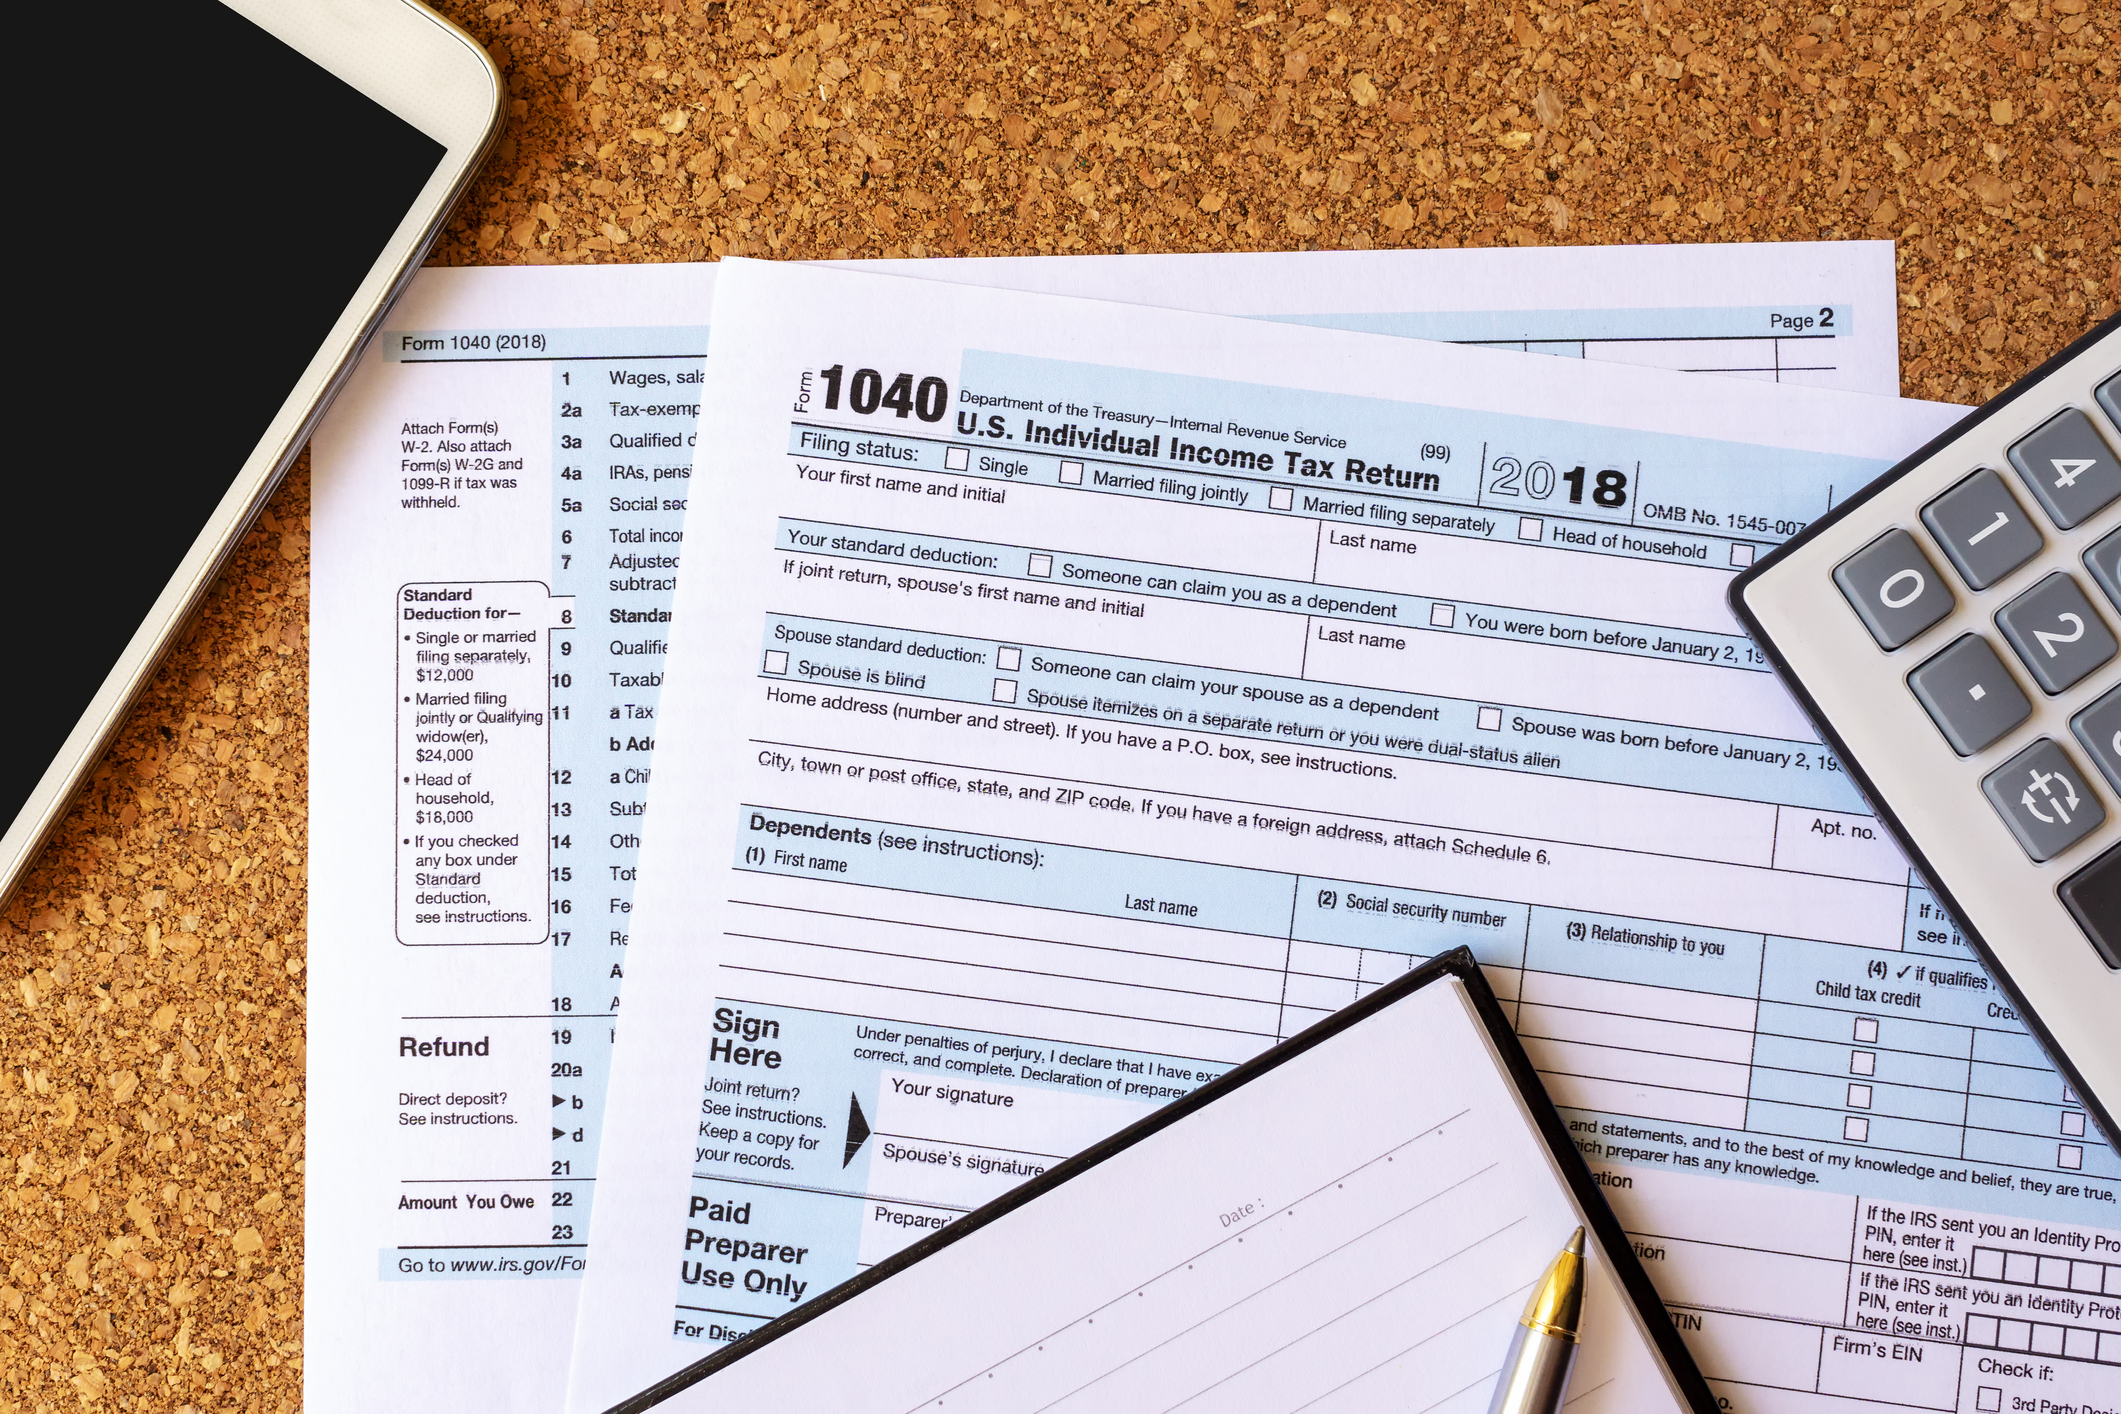 American taxpayers forced to file paper tax returns could face long backlogs. (Nora Sahinun—Getty Images)